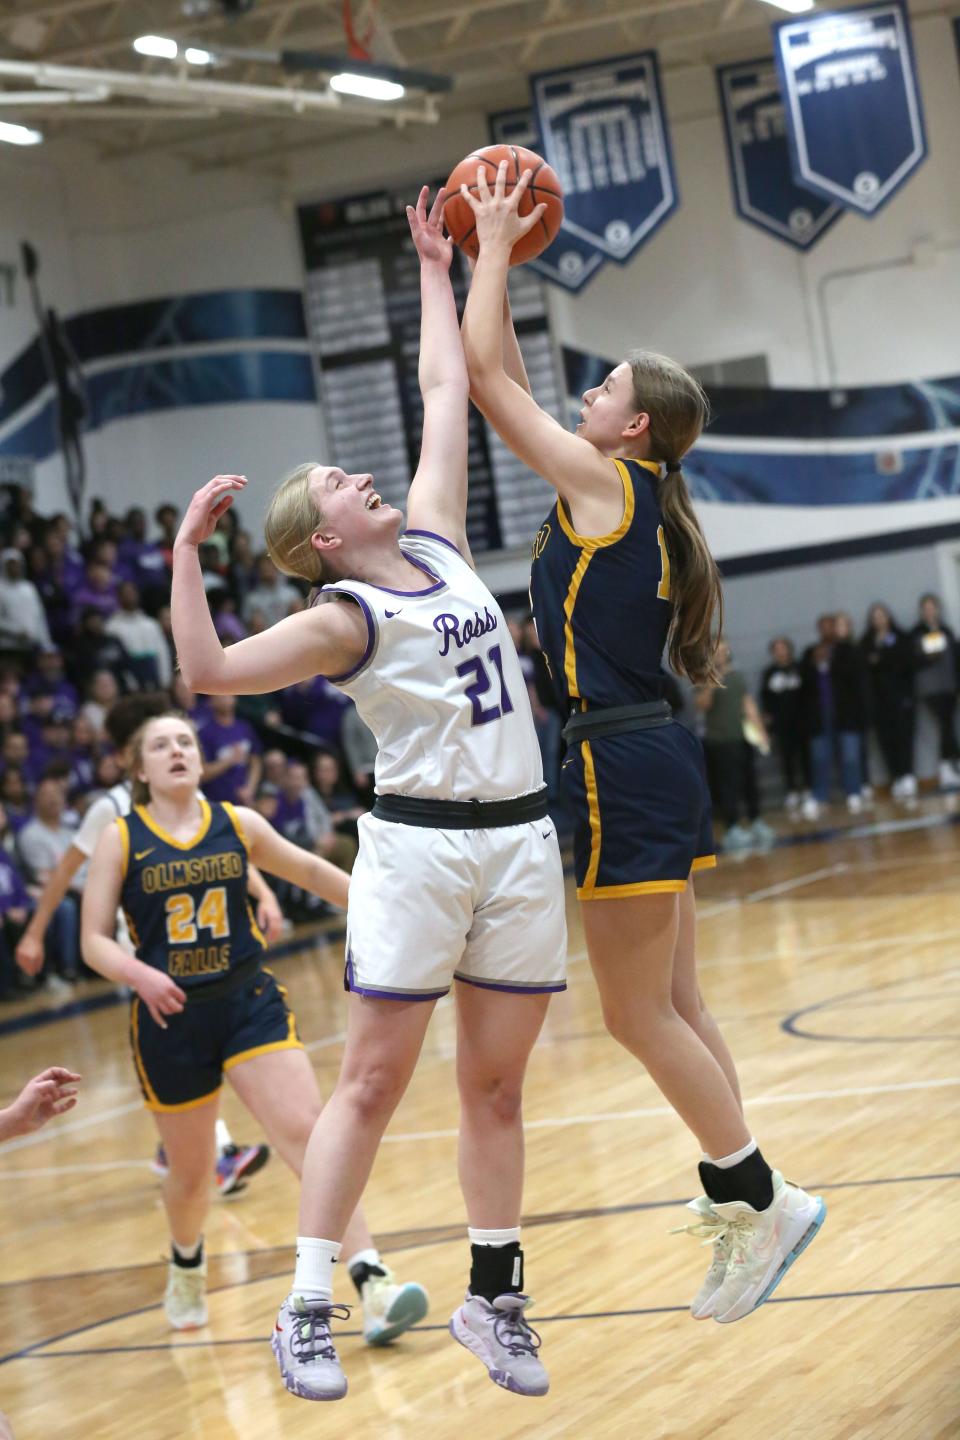 Ross' Abby Cahill fights for a rebound.